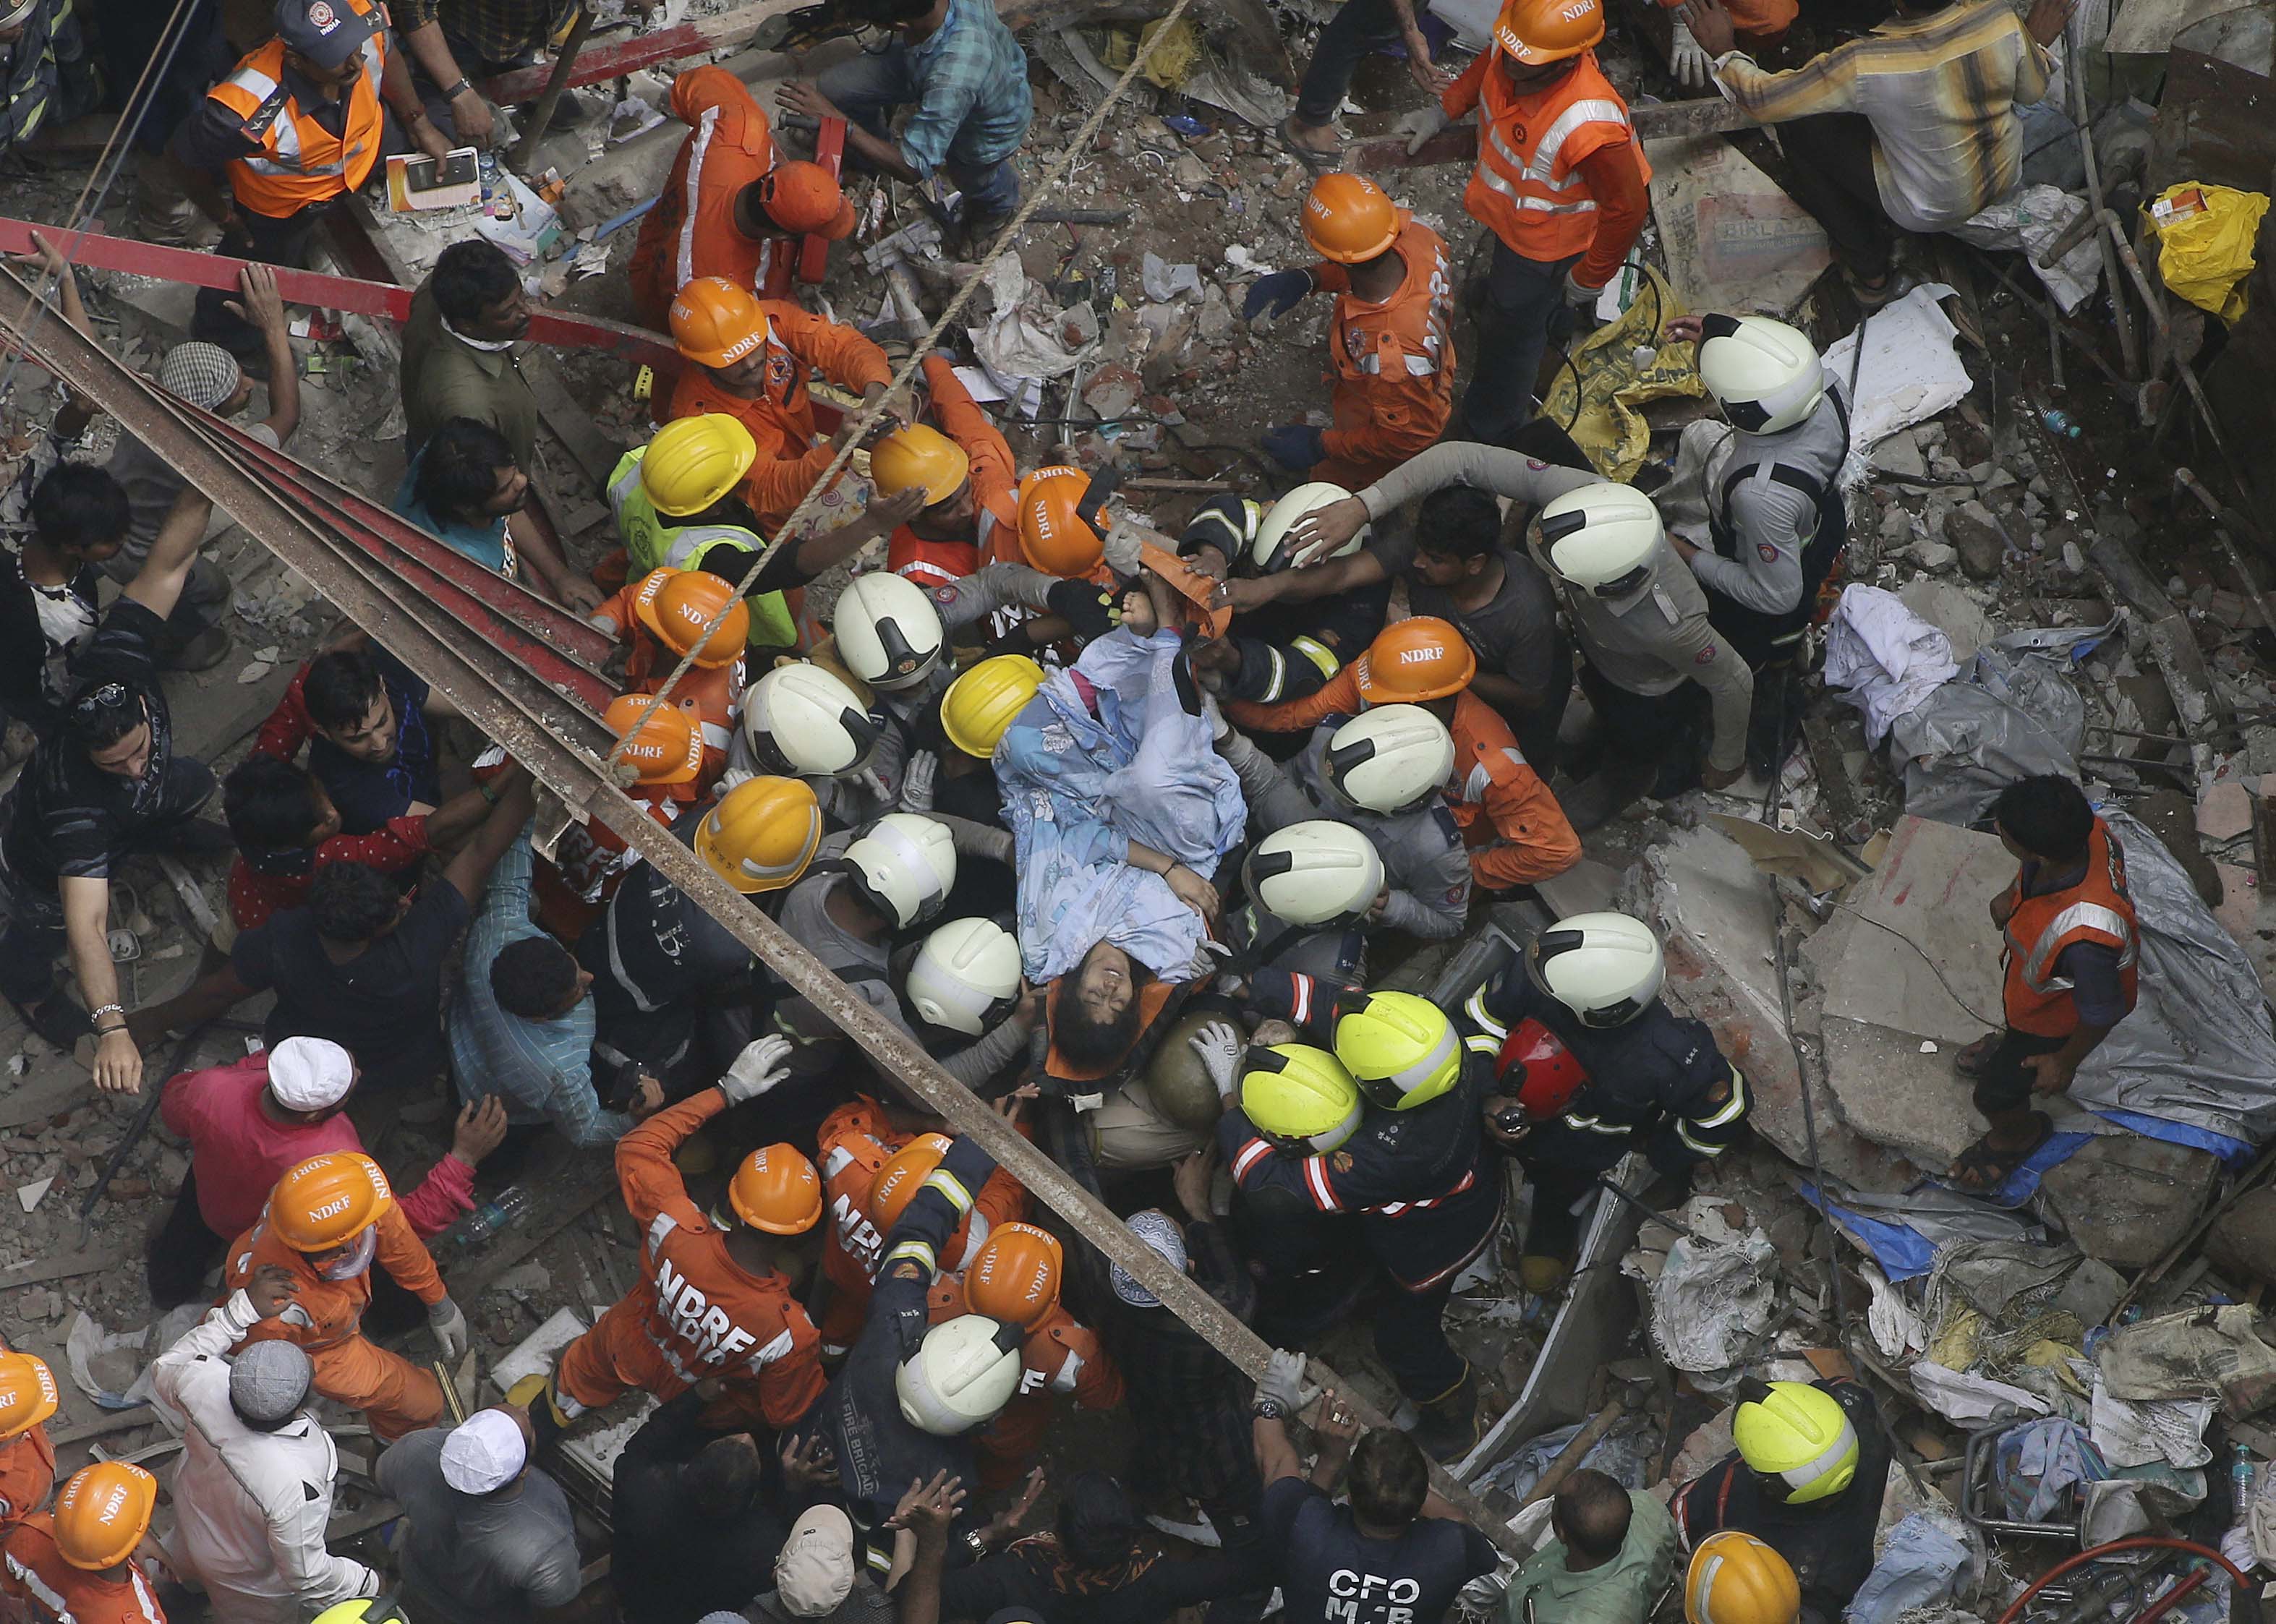 10 killed, over 40 feared trapped as Mumbai building collapses